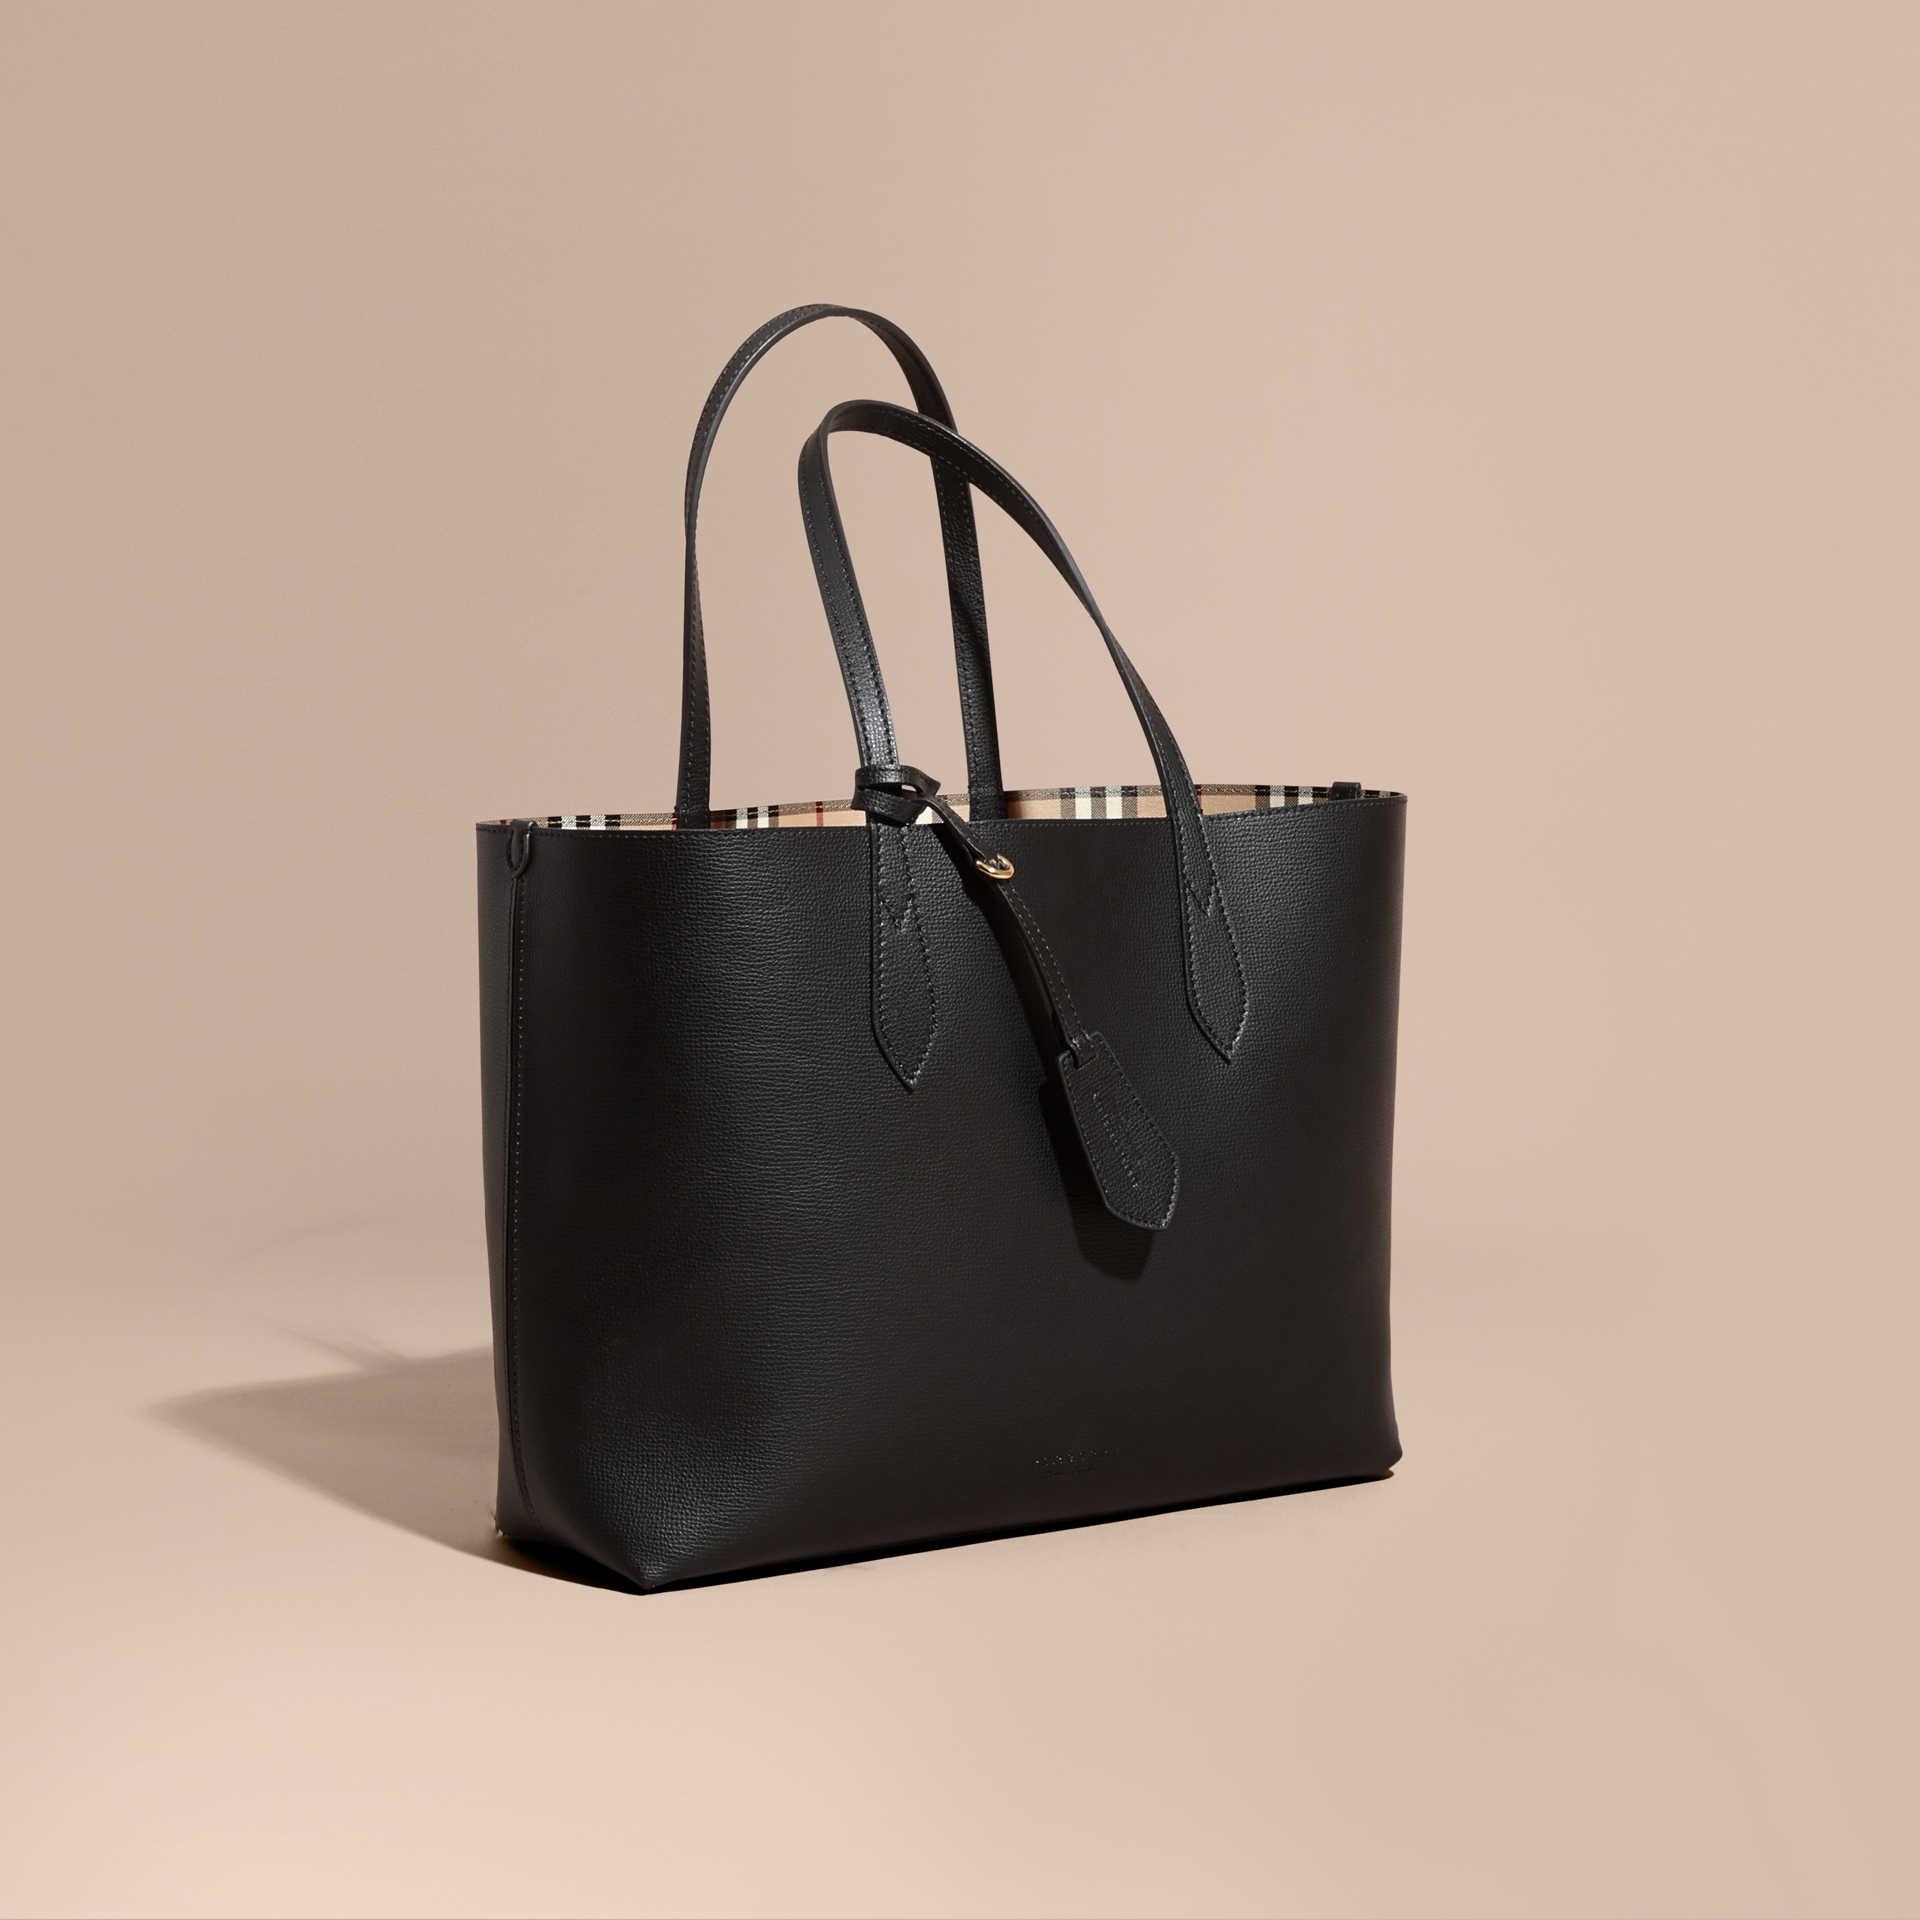 Burberry The Medium Reversible Tote In Haymarket Check And Leather Black in Black | Lyst